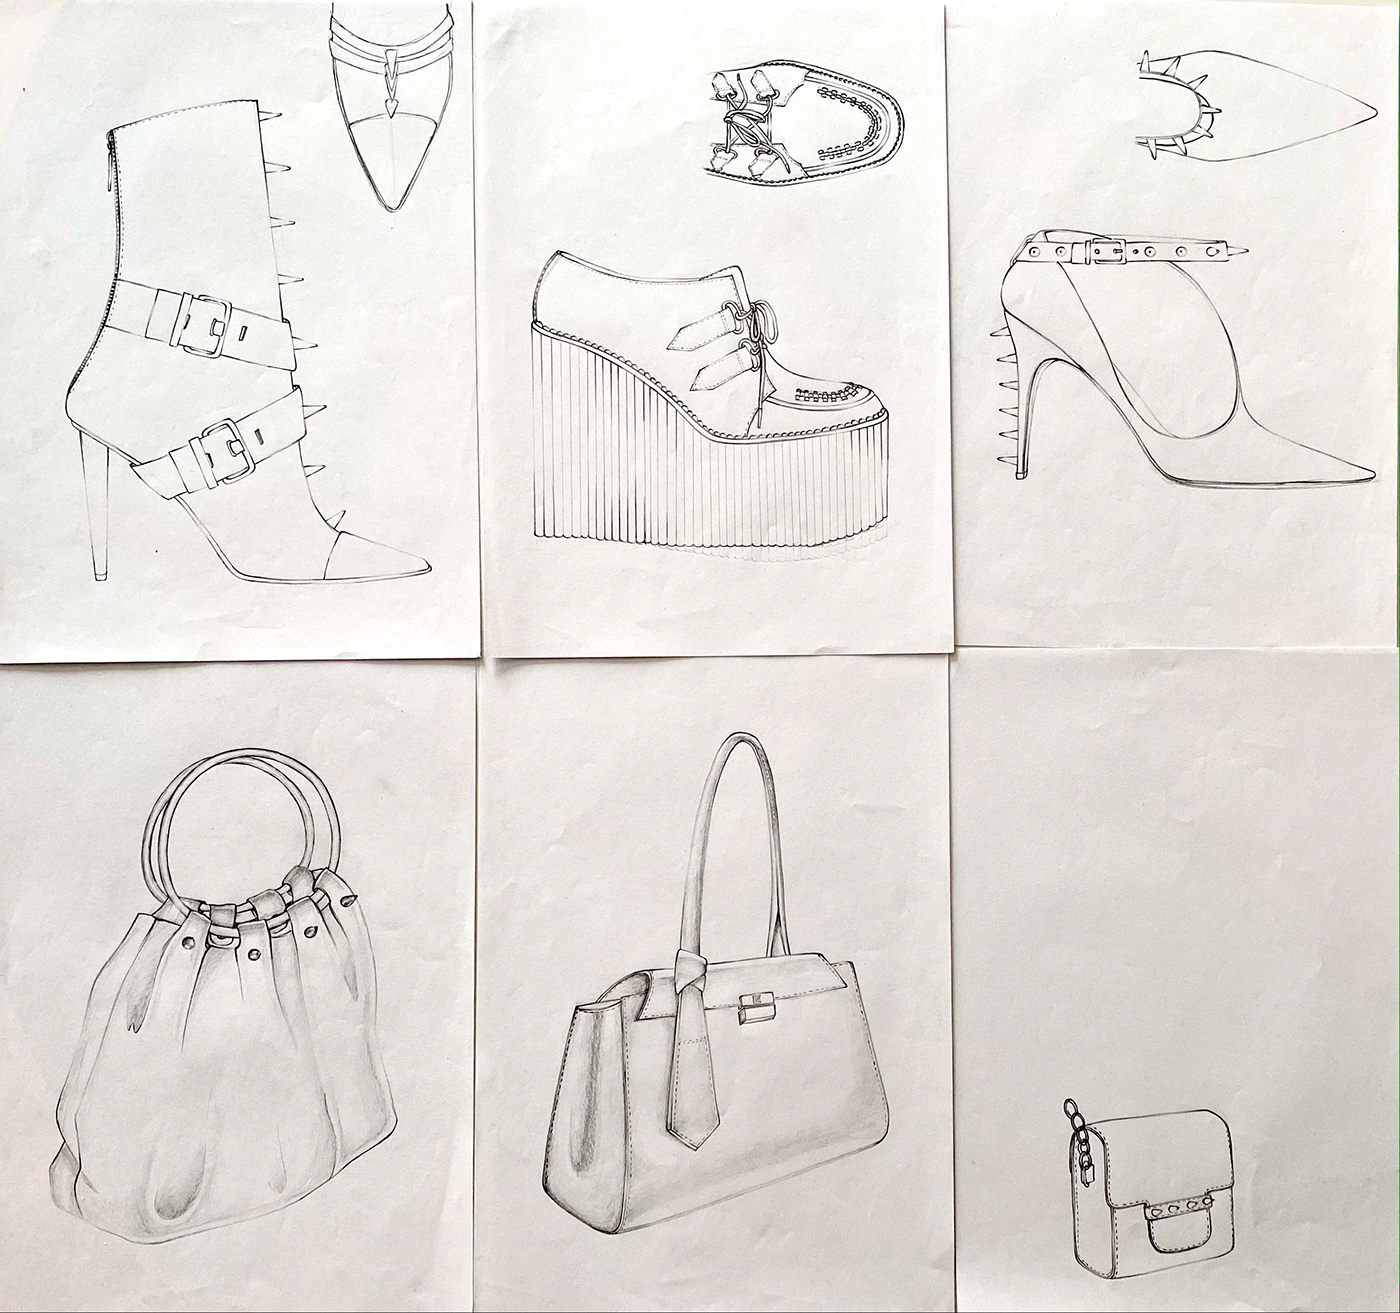 Accessory Drawing  fashiondesign fashiondesigner fashionsketch handdrawing technicaldrawing